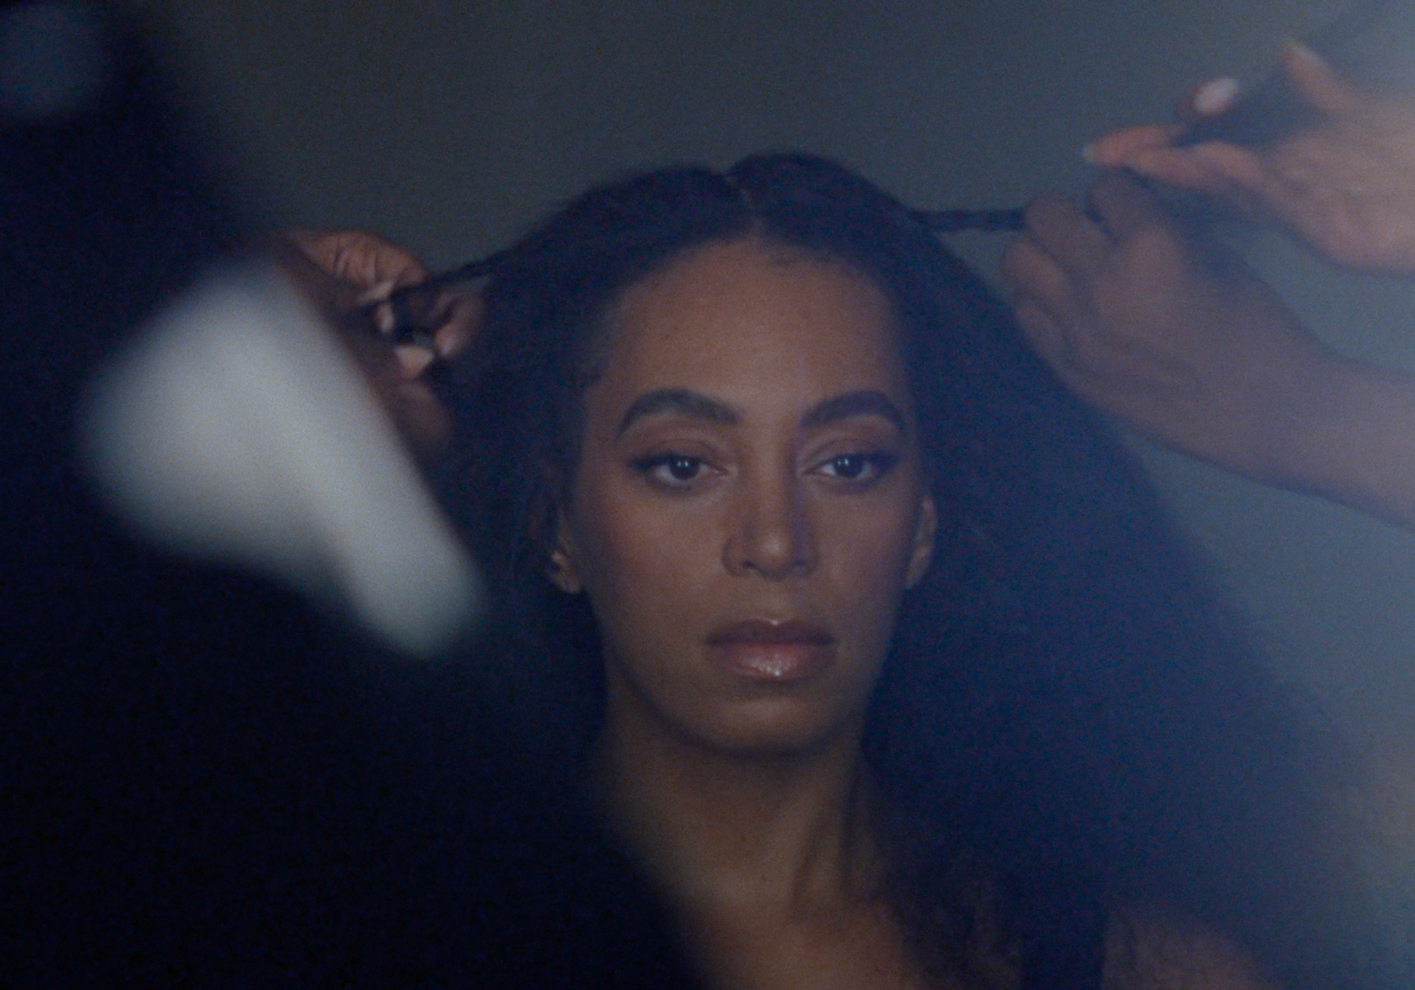 The Louis XIII is made in collaboration with Solange Knowles